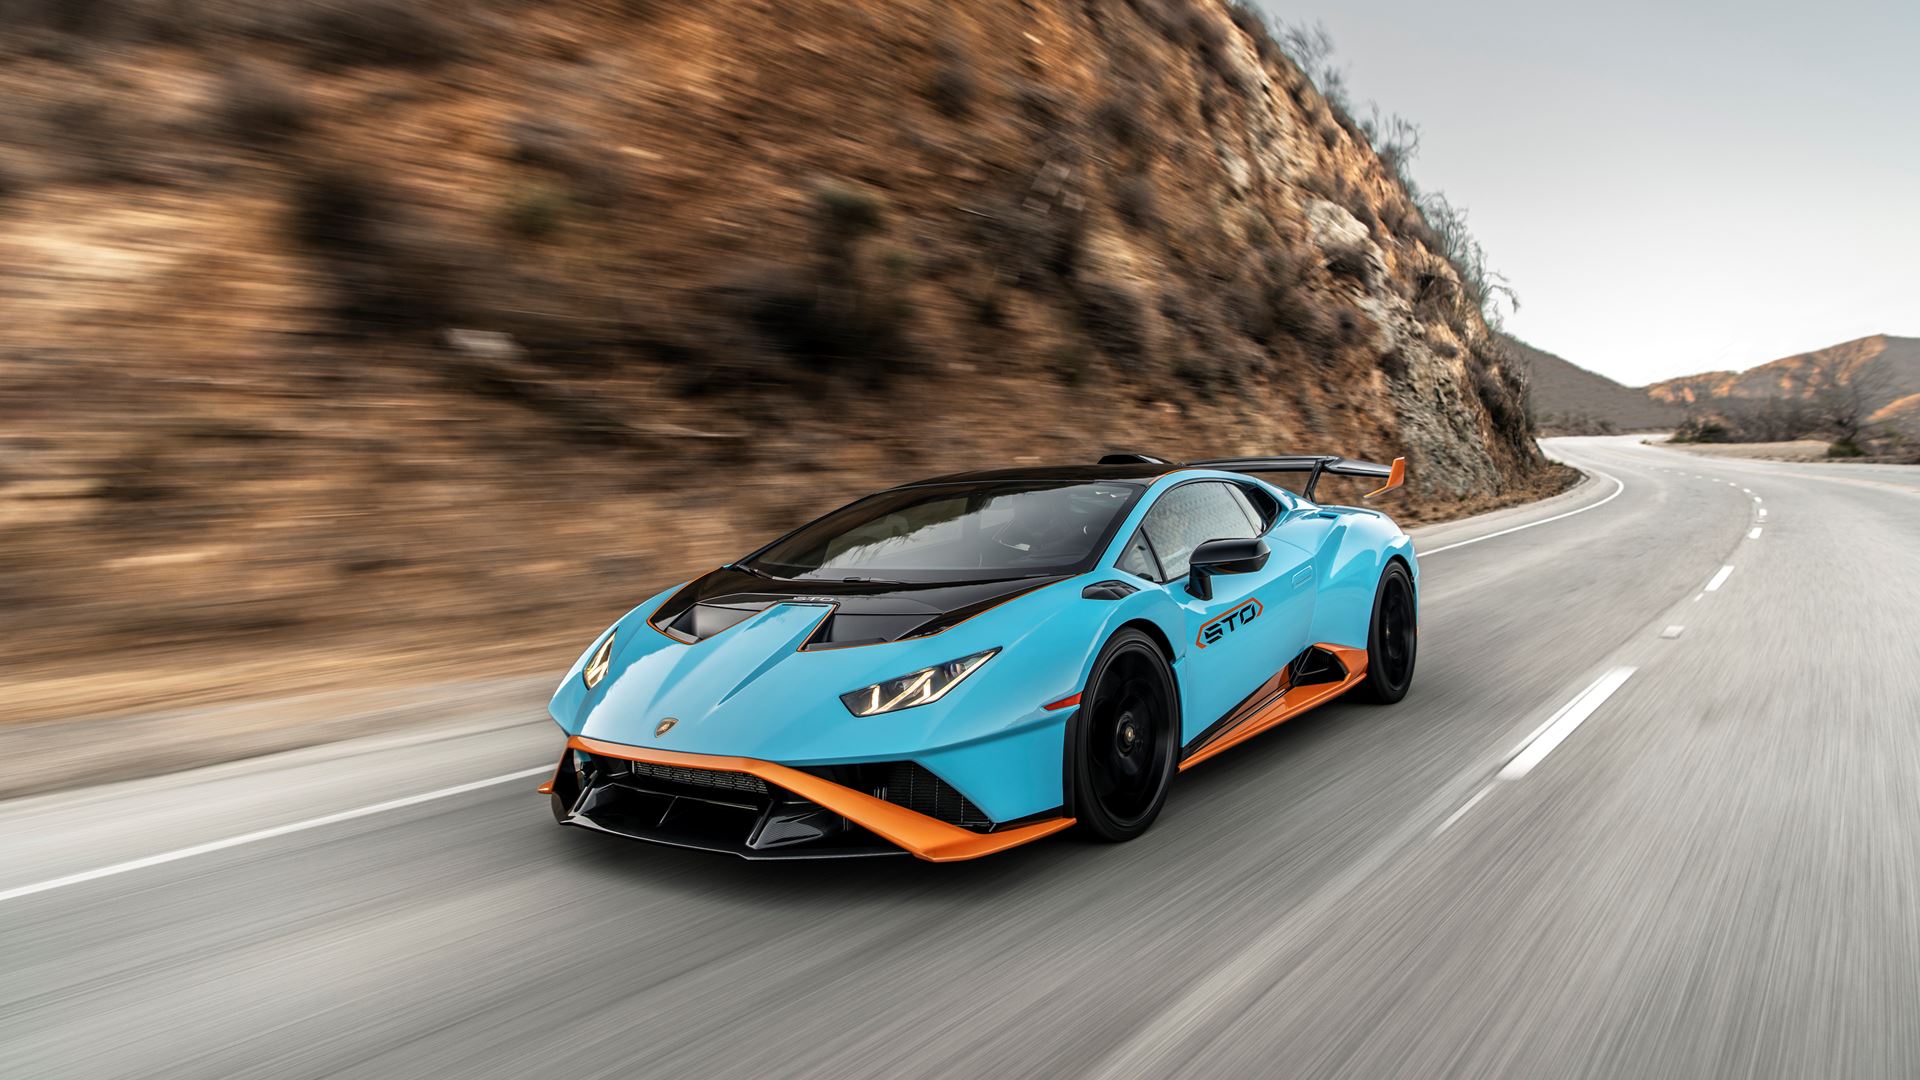 A record-breaking 2021 for Automobili Lamborghini - The company recorded its best year ever, with 8,405 cars delivered - Image 2